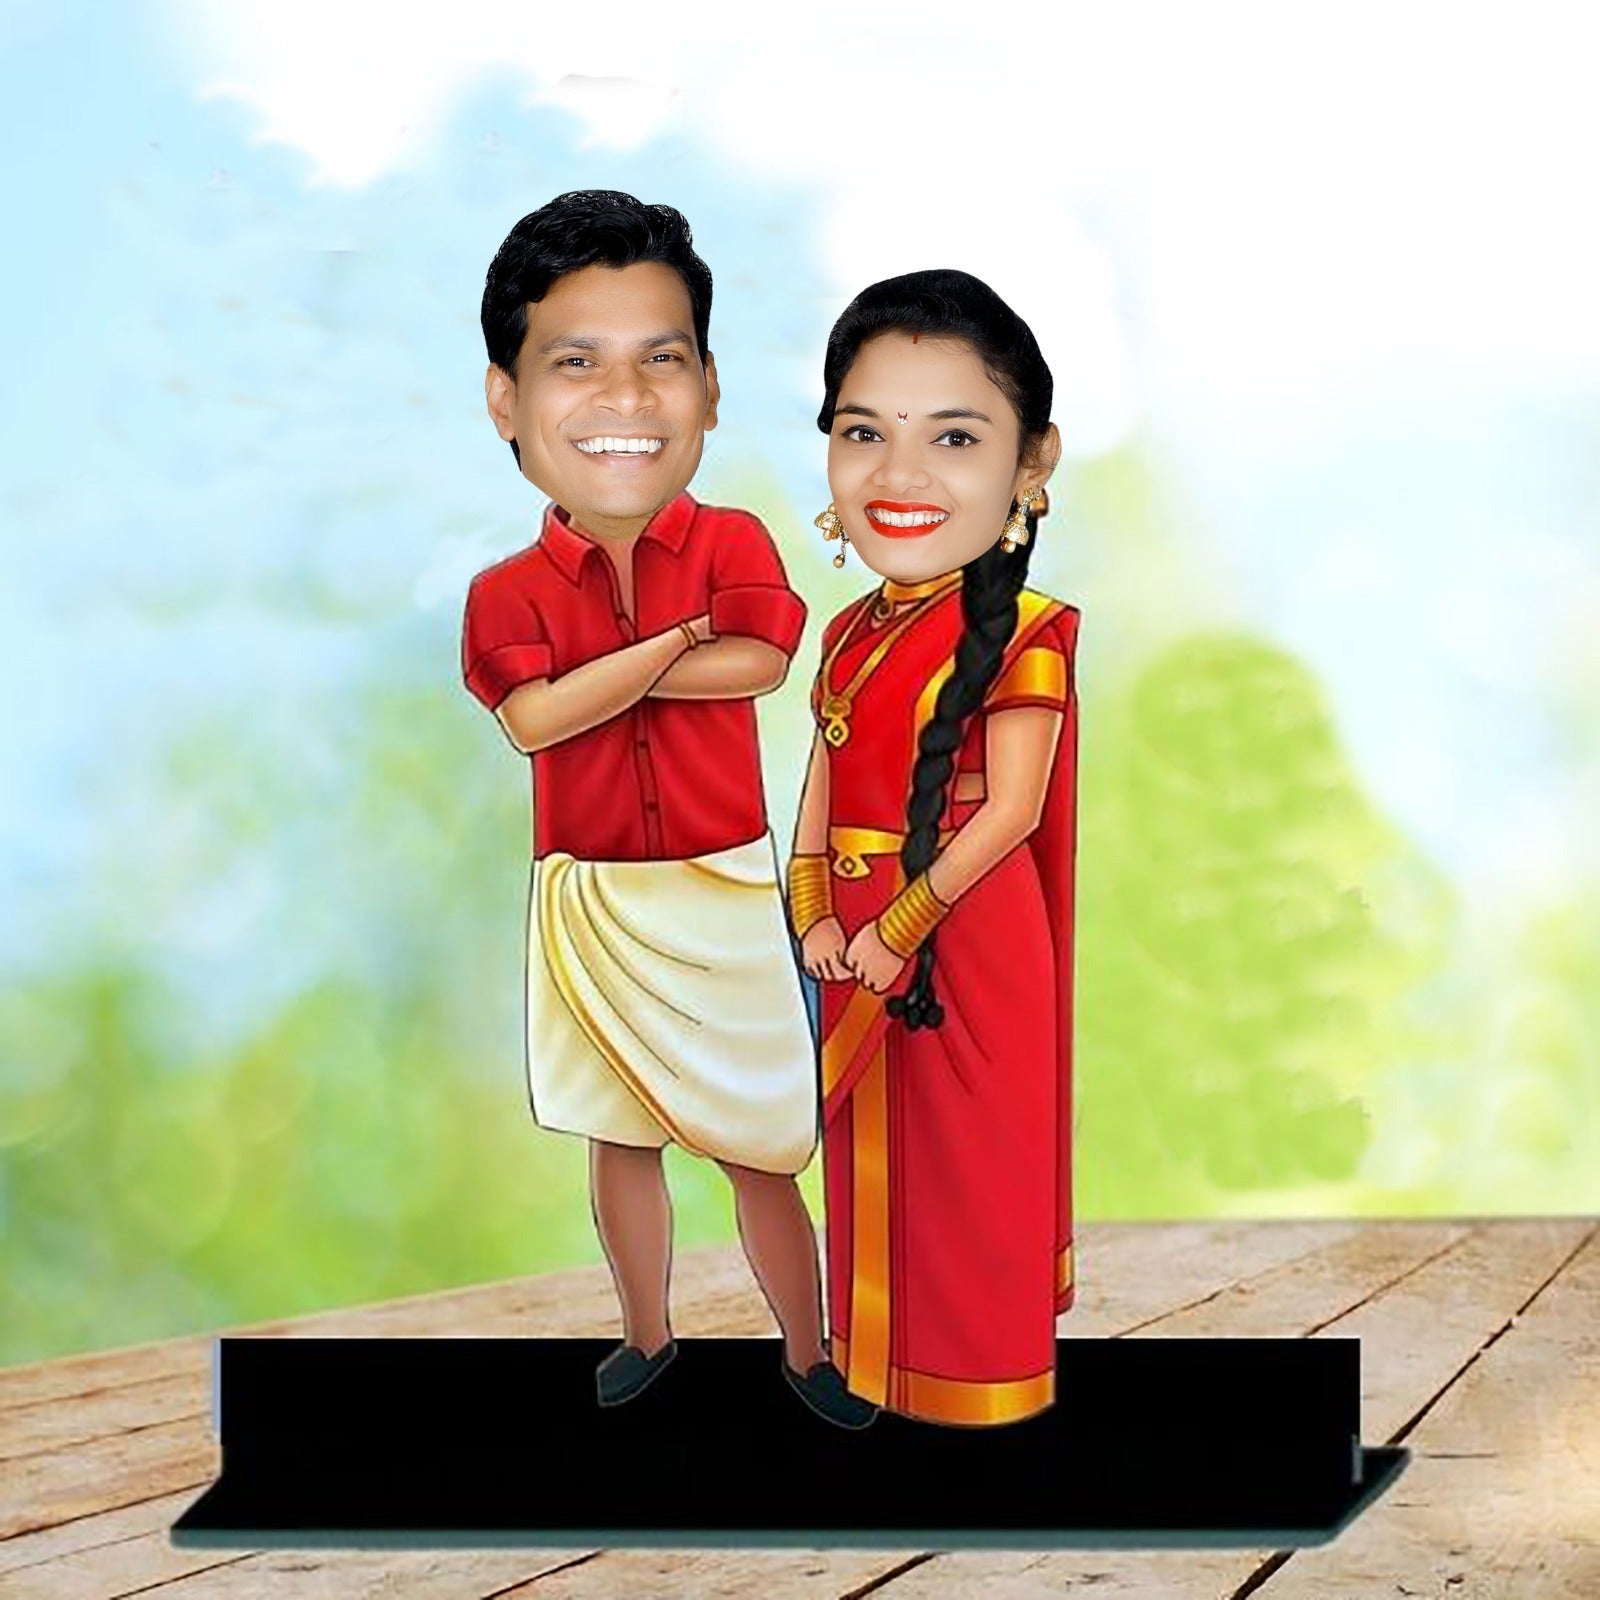 Customized 3D Colorful Caricature With Cute Couple Photo - South Indian